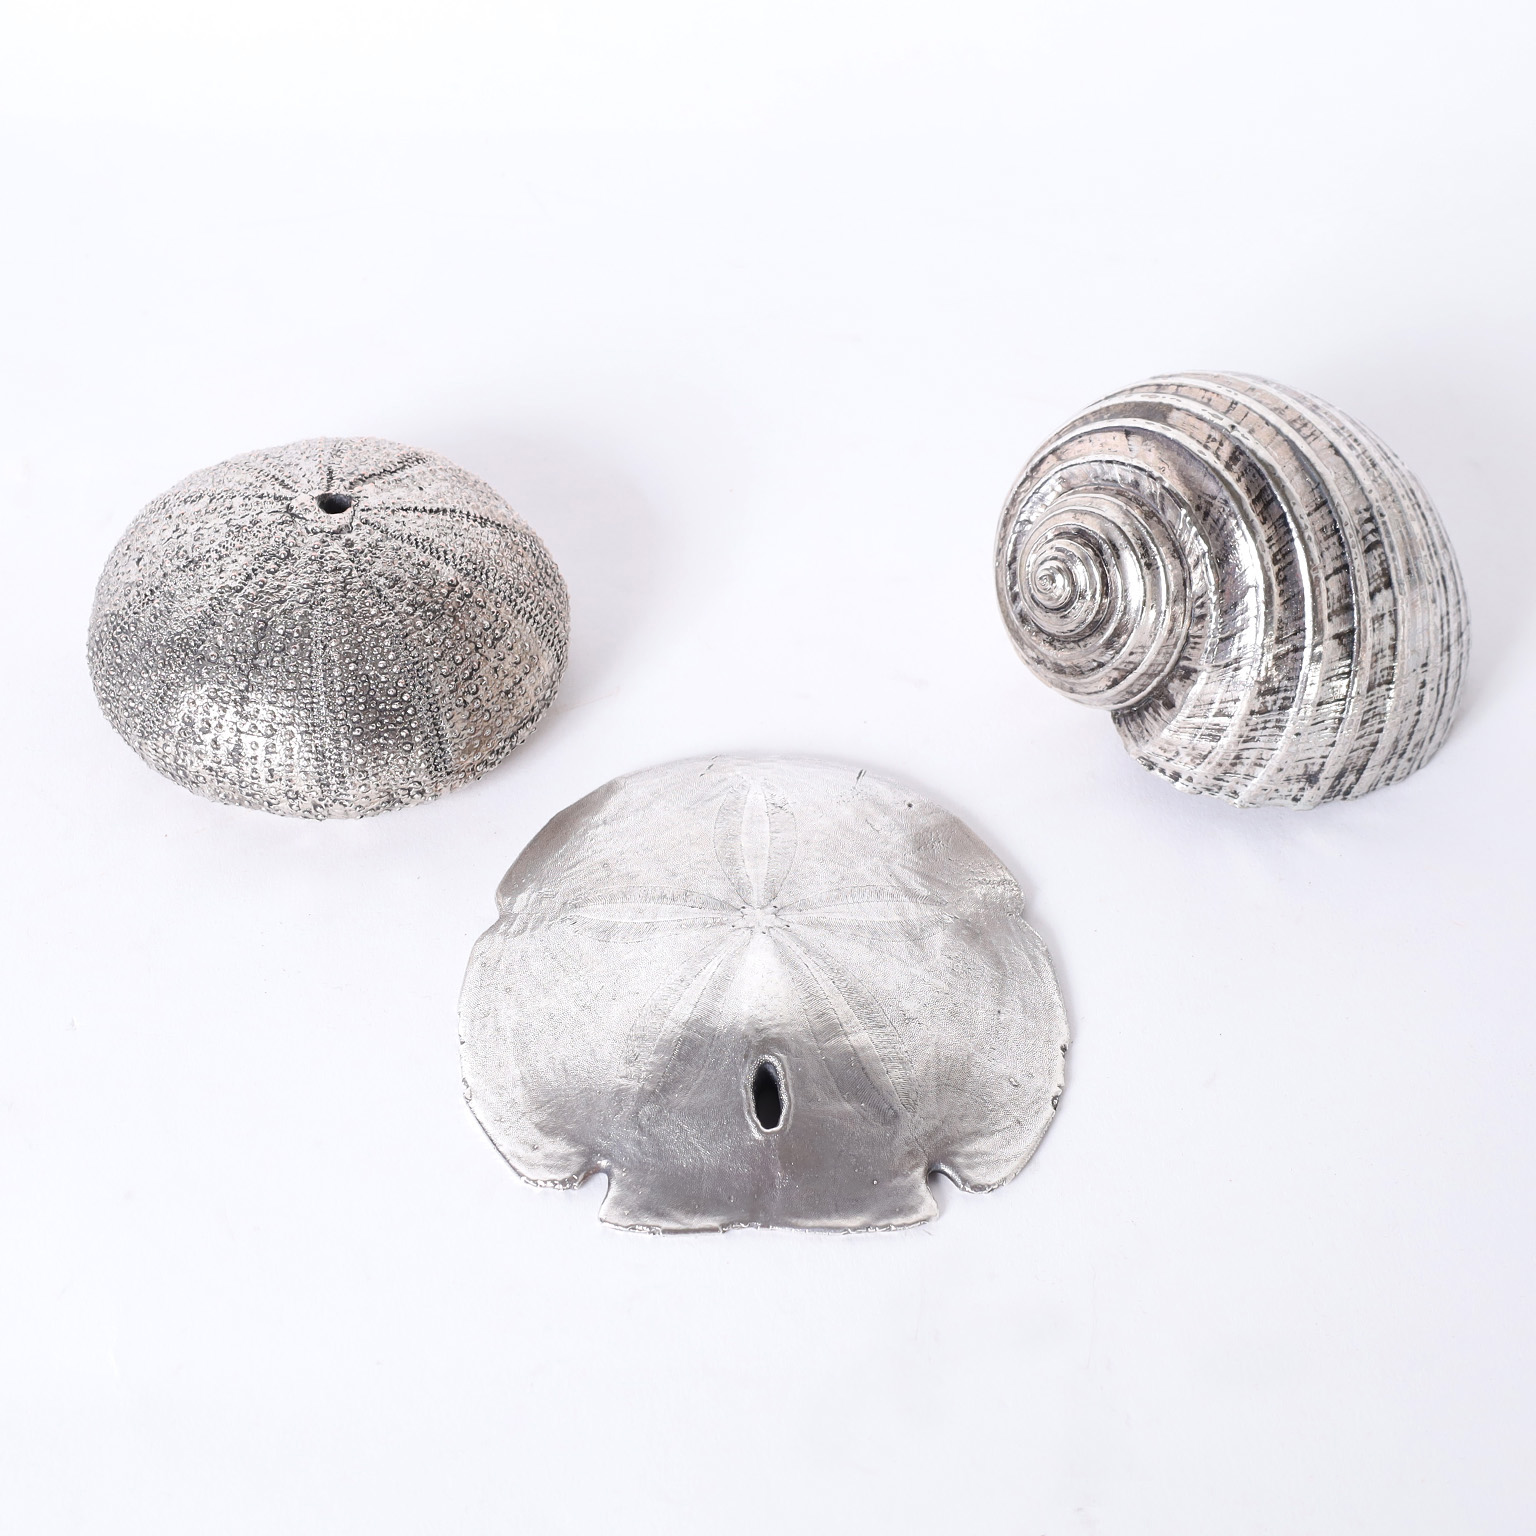 Group of Three Silver Plated Seashells, Priced Individually